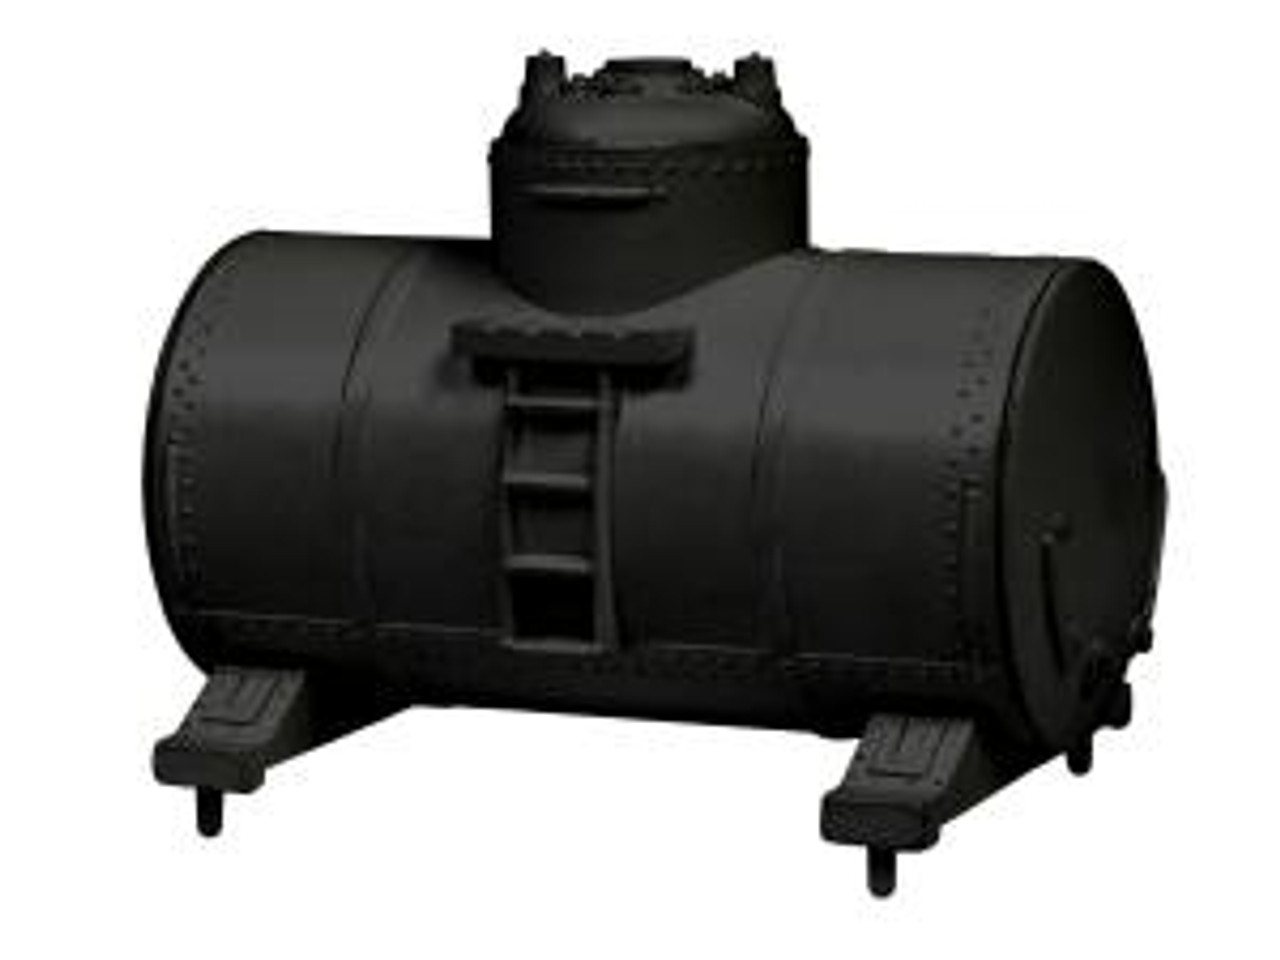 Tank Containers 4-Pack - black